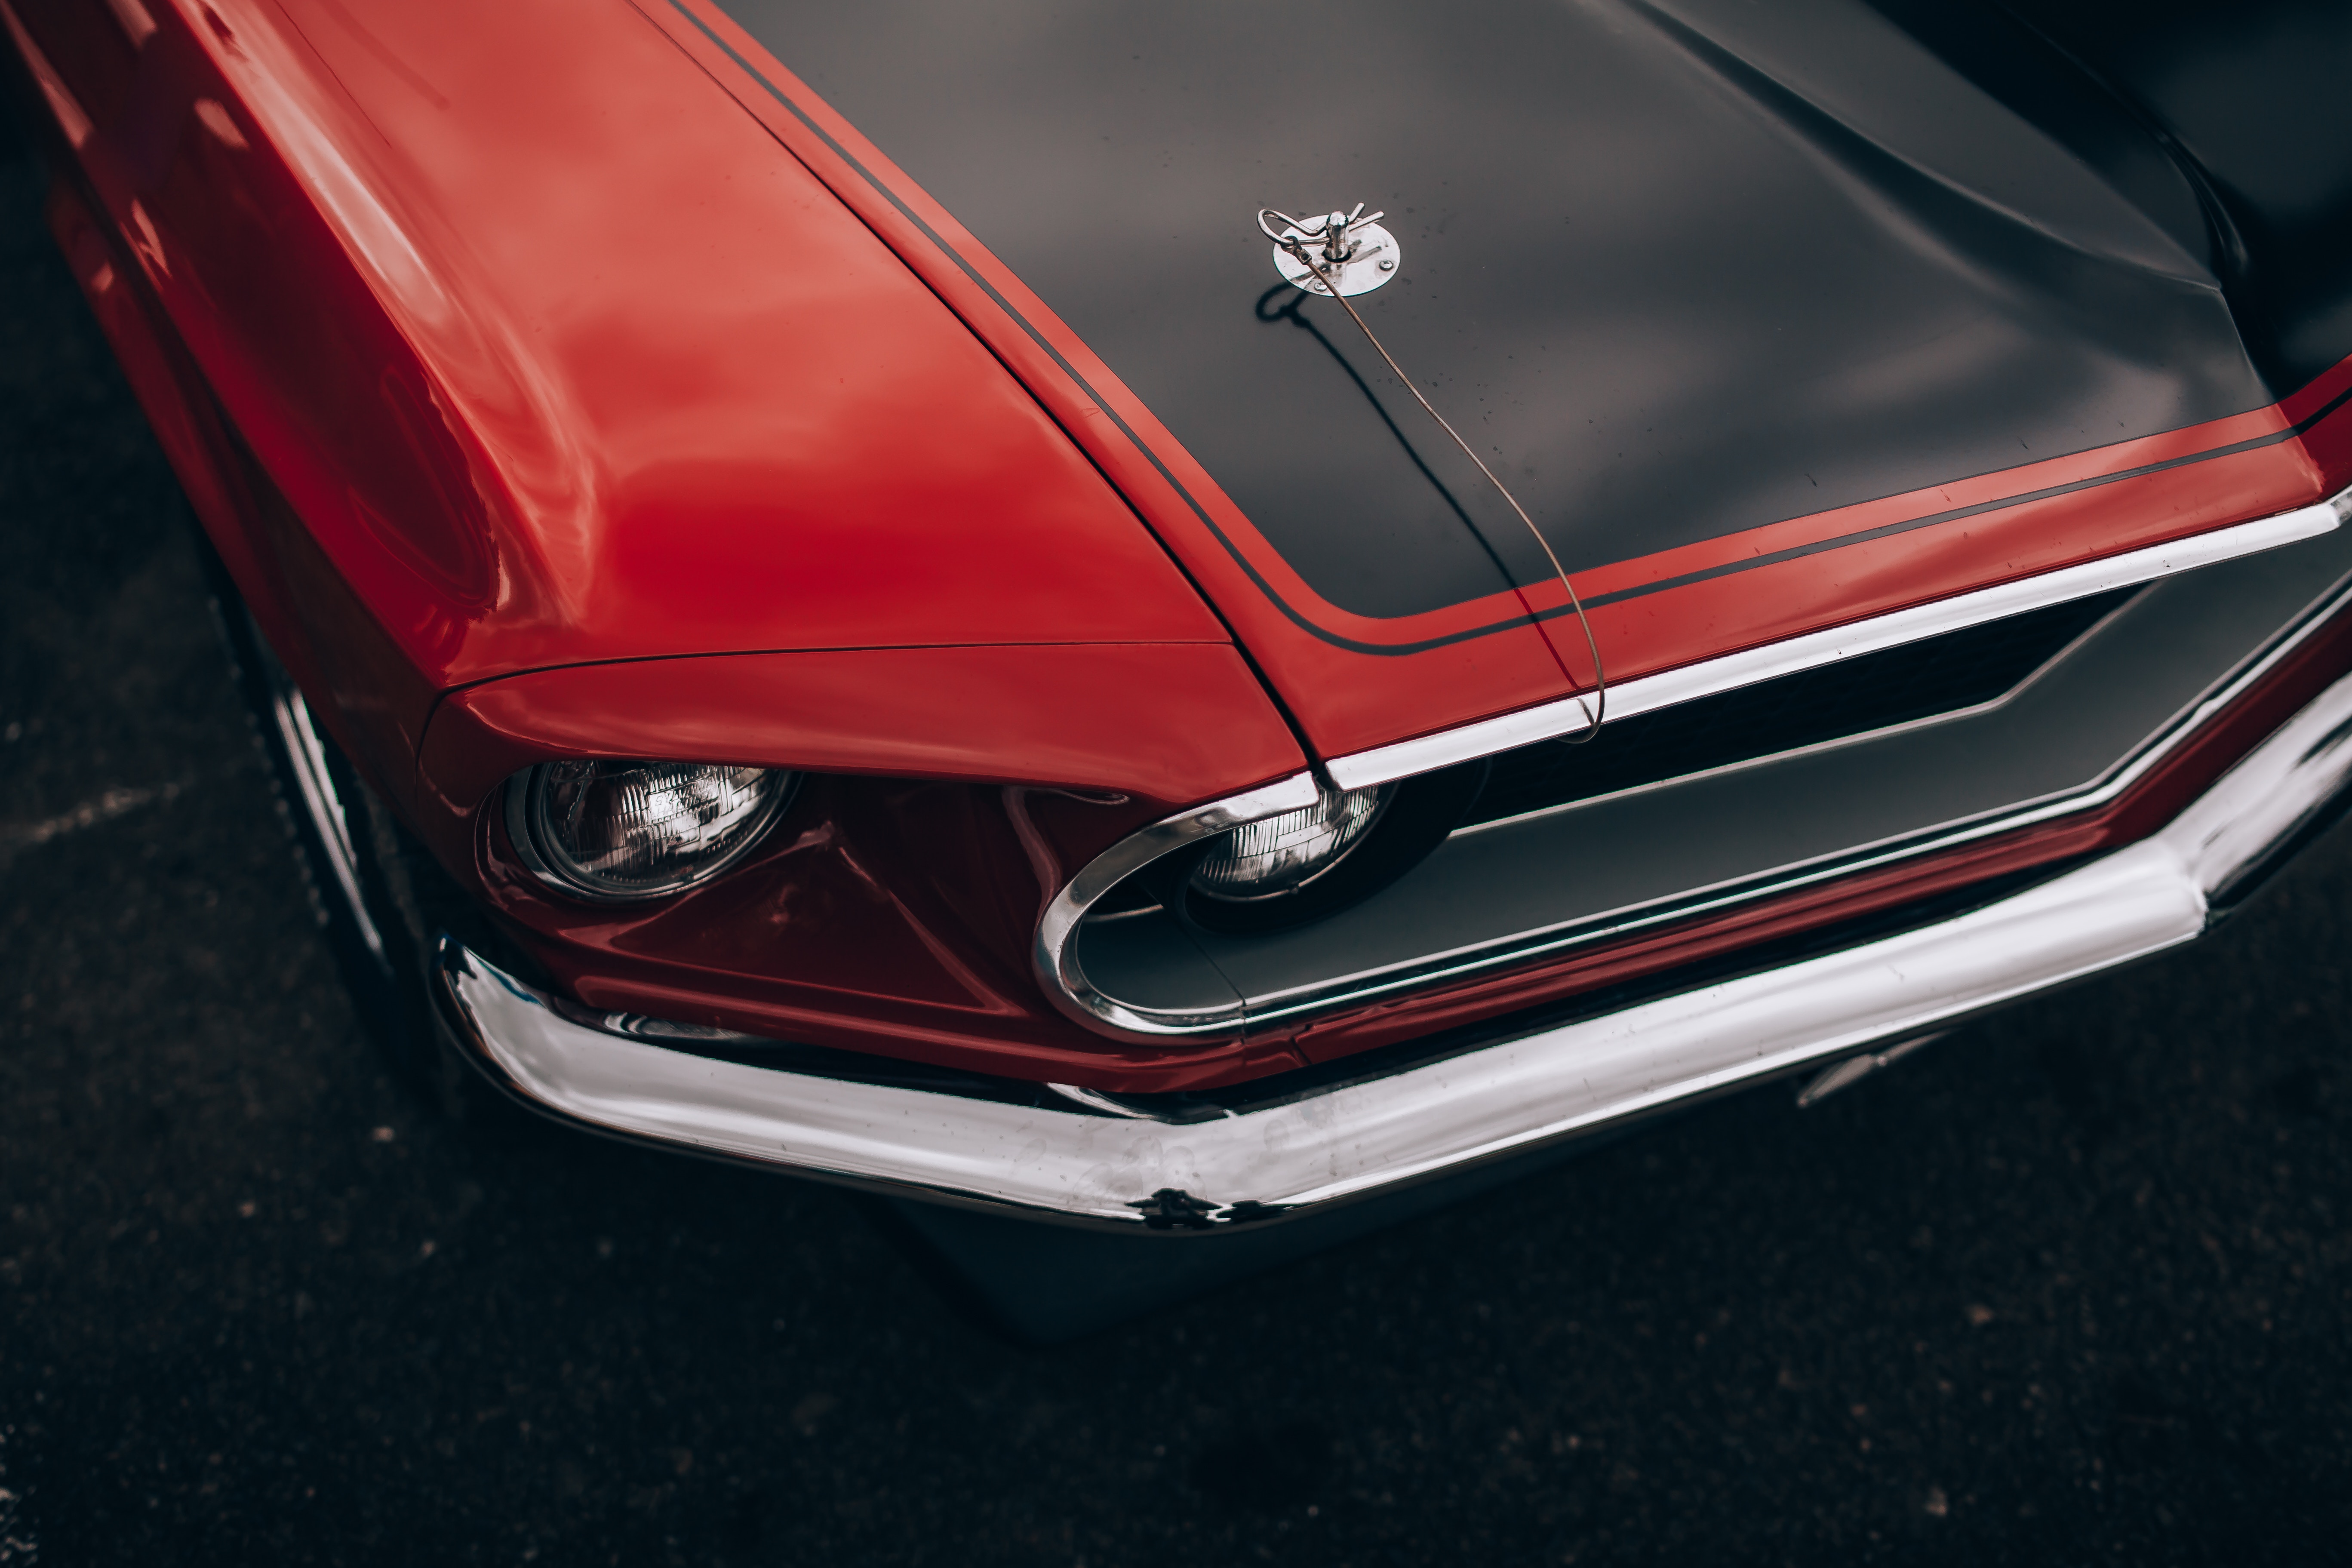 cars, red, car, close-up, old, wing, headlight